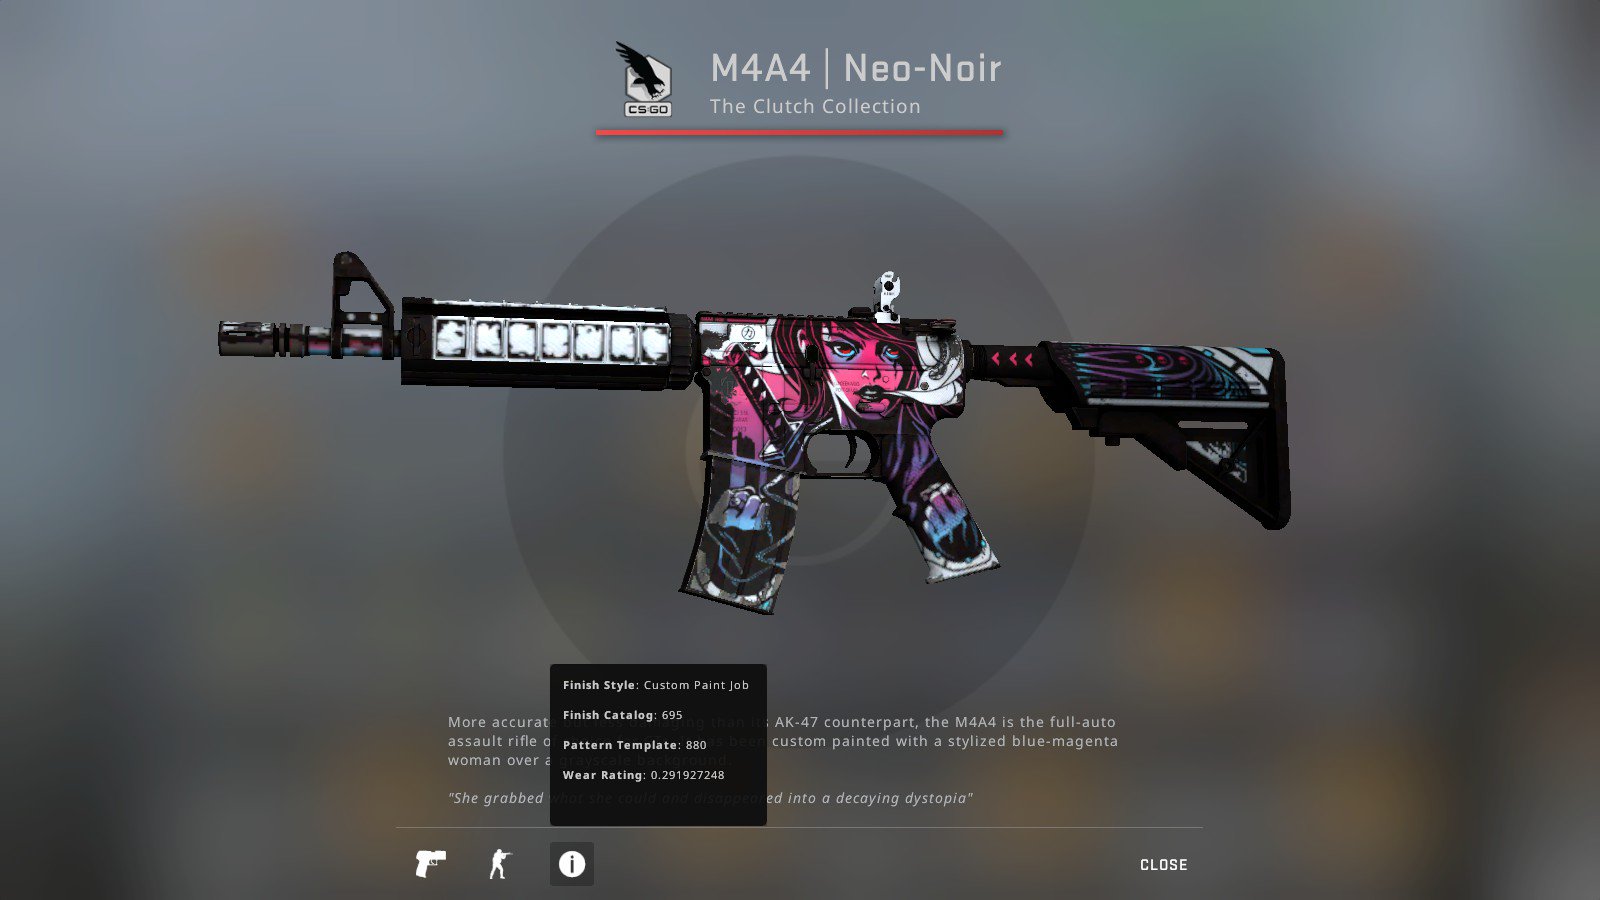 Bogholder hybrid Arena Zadara on Twitter: "🖤M4A4 | Neo-Noir (FT)🖤 • RETWEET🖤 • FOLLOW  @ZadaraGives & @VenixGives • Subscribe https://t.co/zVRX9RyB2n • TAG SOME  FRIENDS🖤 ENDING: 24H🖤 GL🍀 https://t.co/LmFtf3hXv8" / Twitter